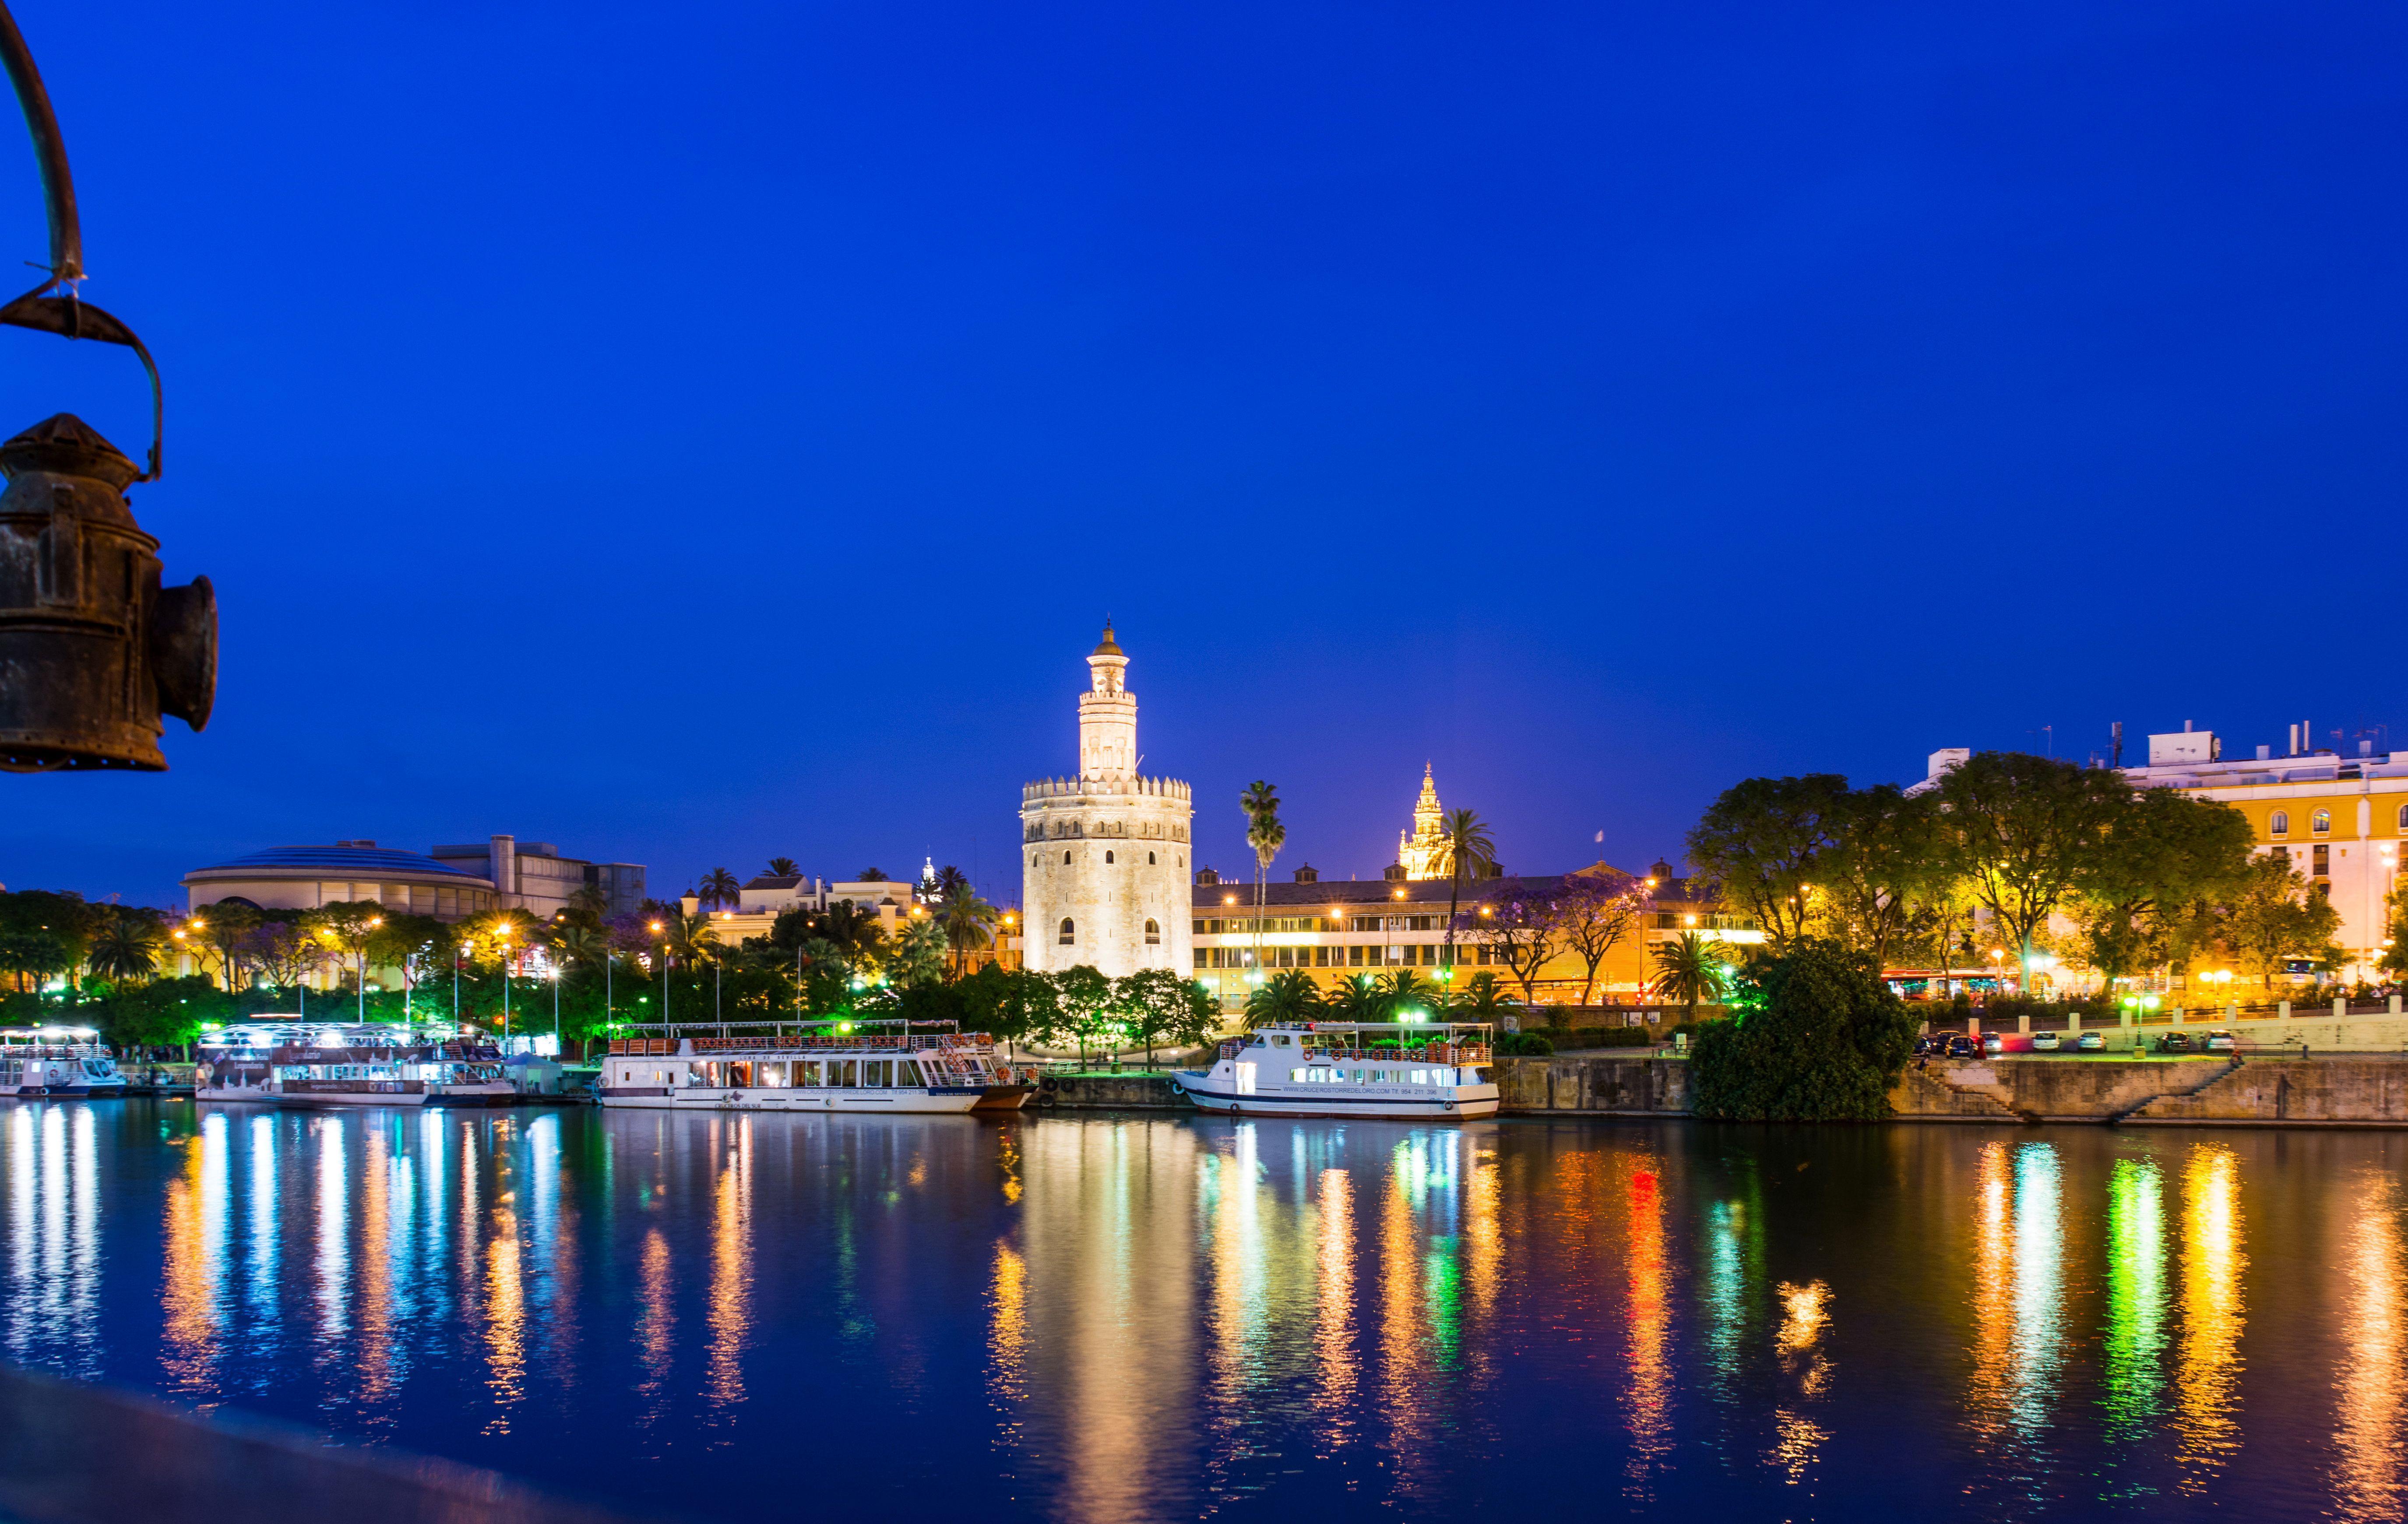 Image Spain Seville Night Rivers Cities Houses 5500x3480